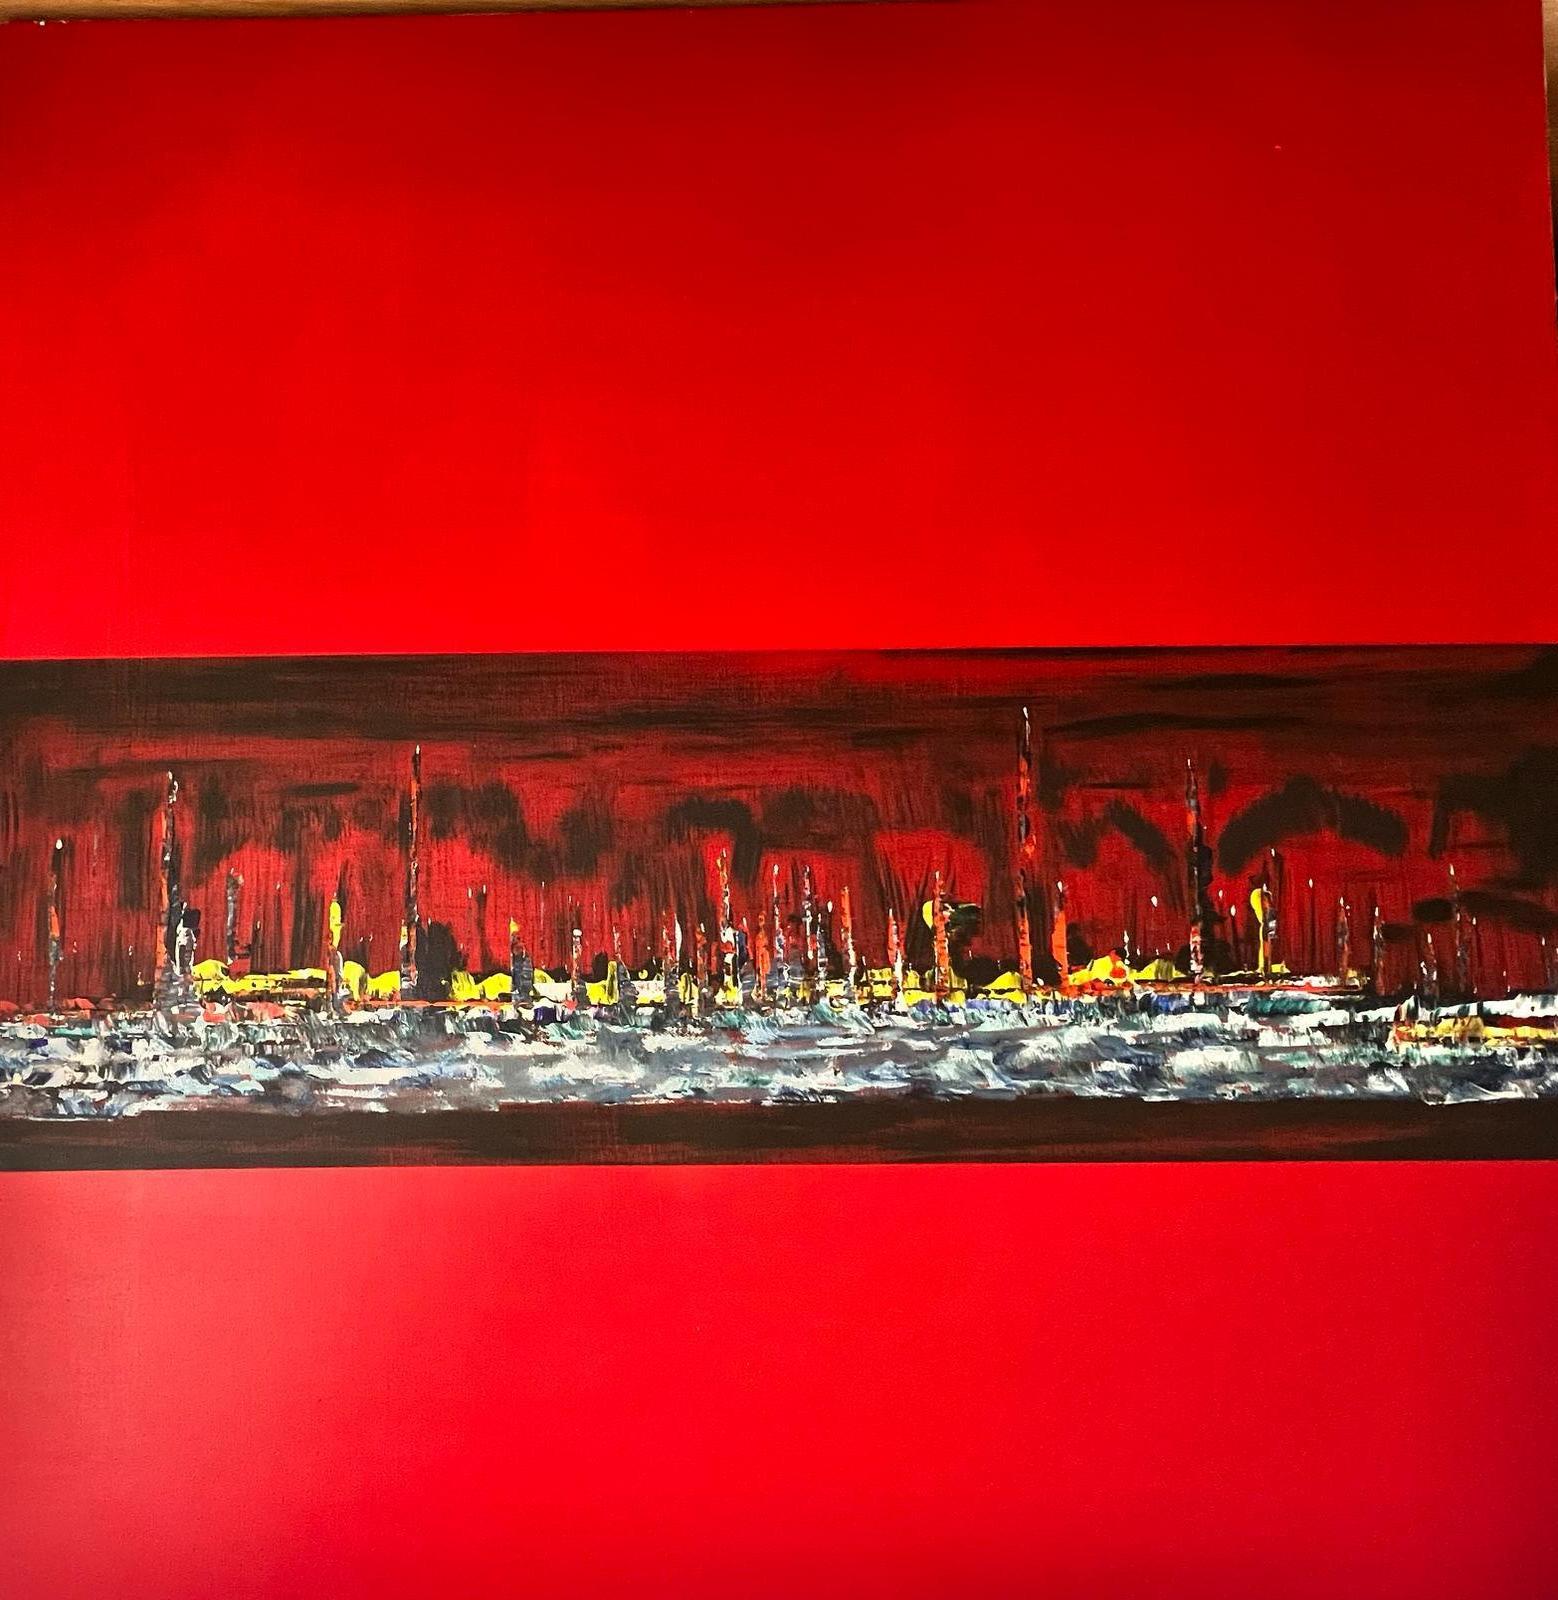 'Crimson Cities', 2008
oil painting on canvas, unframed
signed verso illegibly
canvas: 39.5 x 39.5 inches 
provenance: private collection, England
condition: very good and sound condition - small paint loss/ scuff to canvas